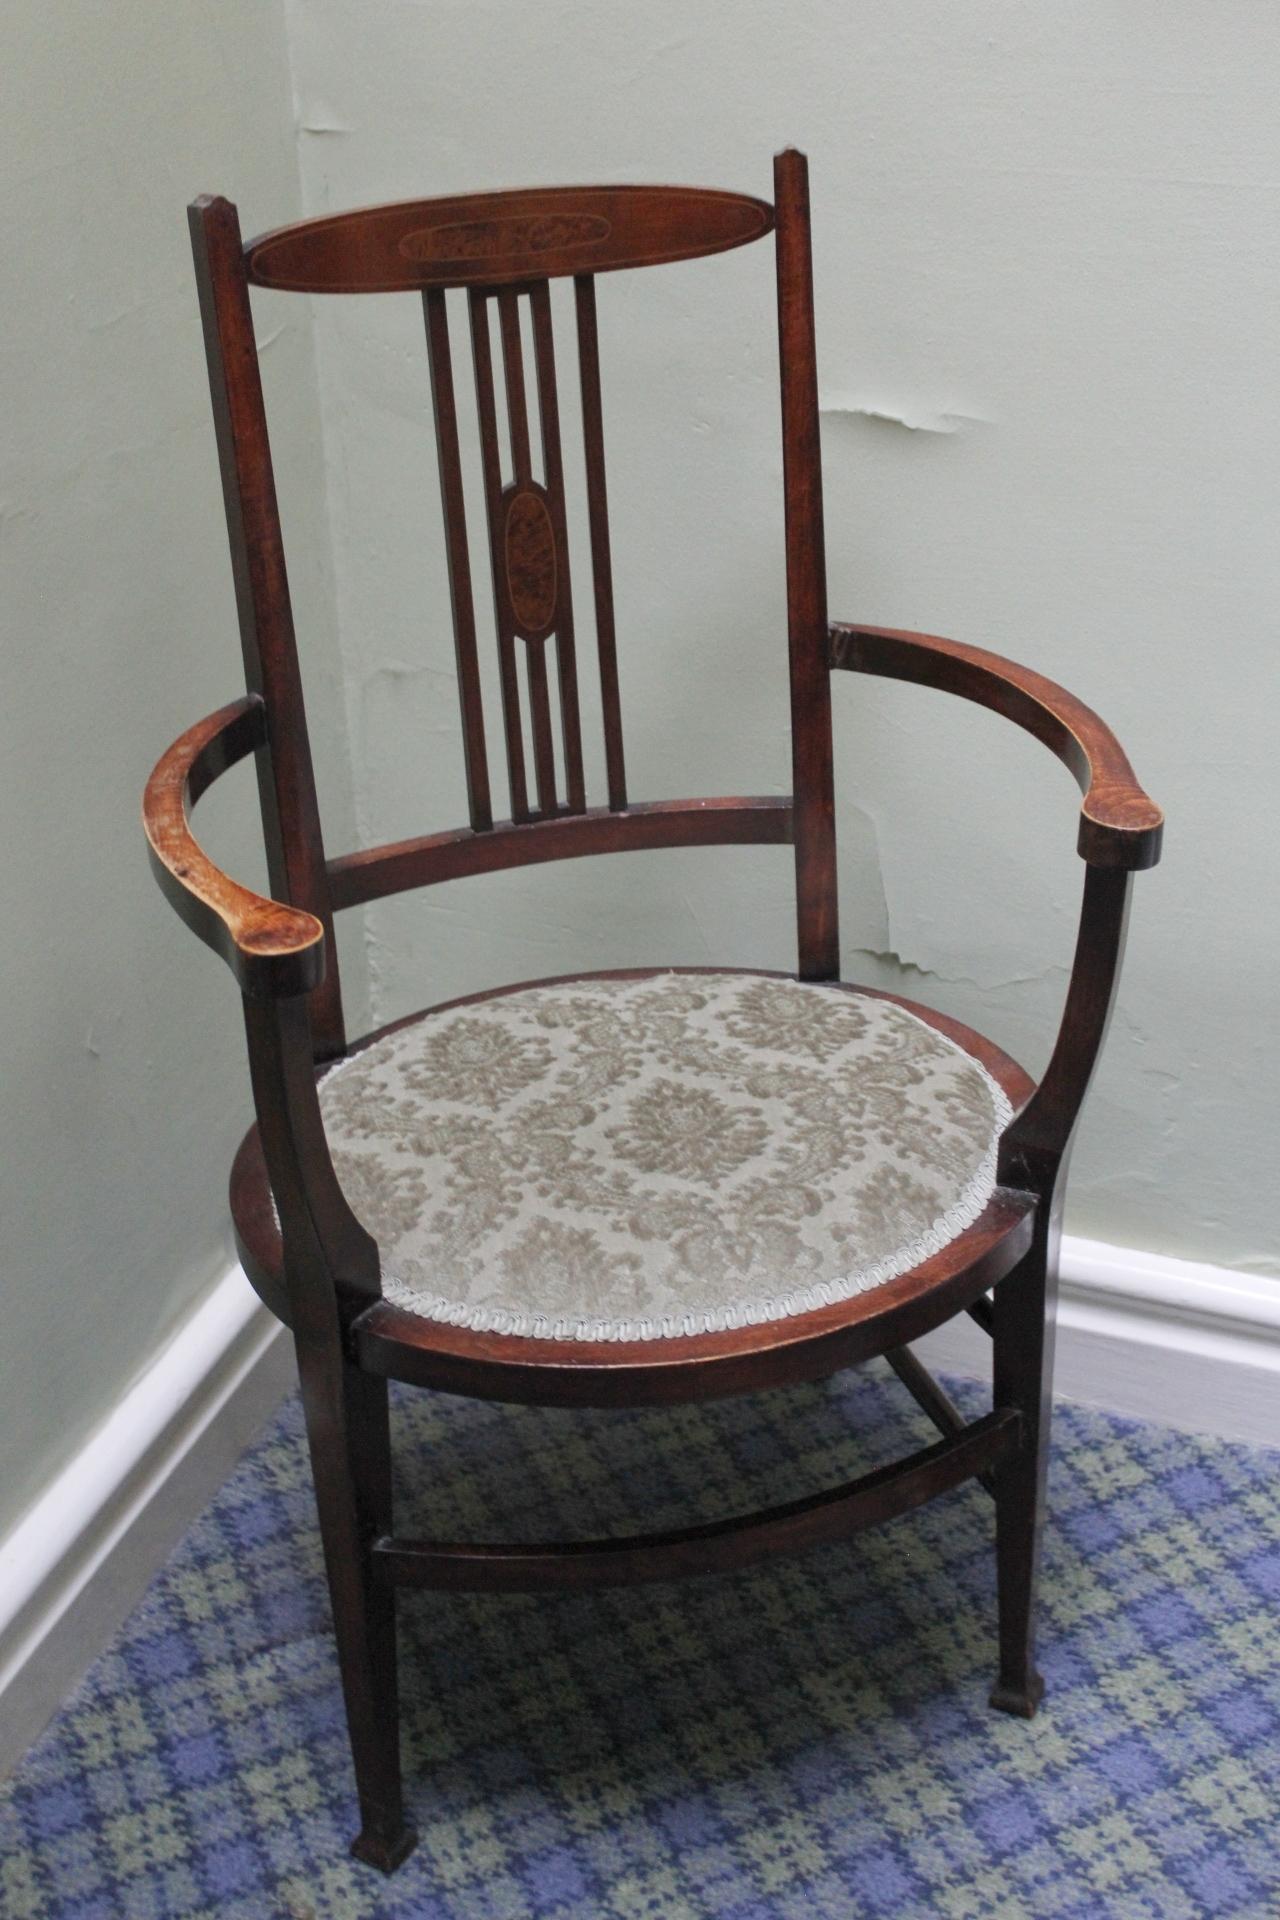 Edwardian mahogany elbow chair, oval seat and inlaid stringing.